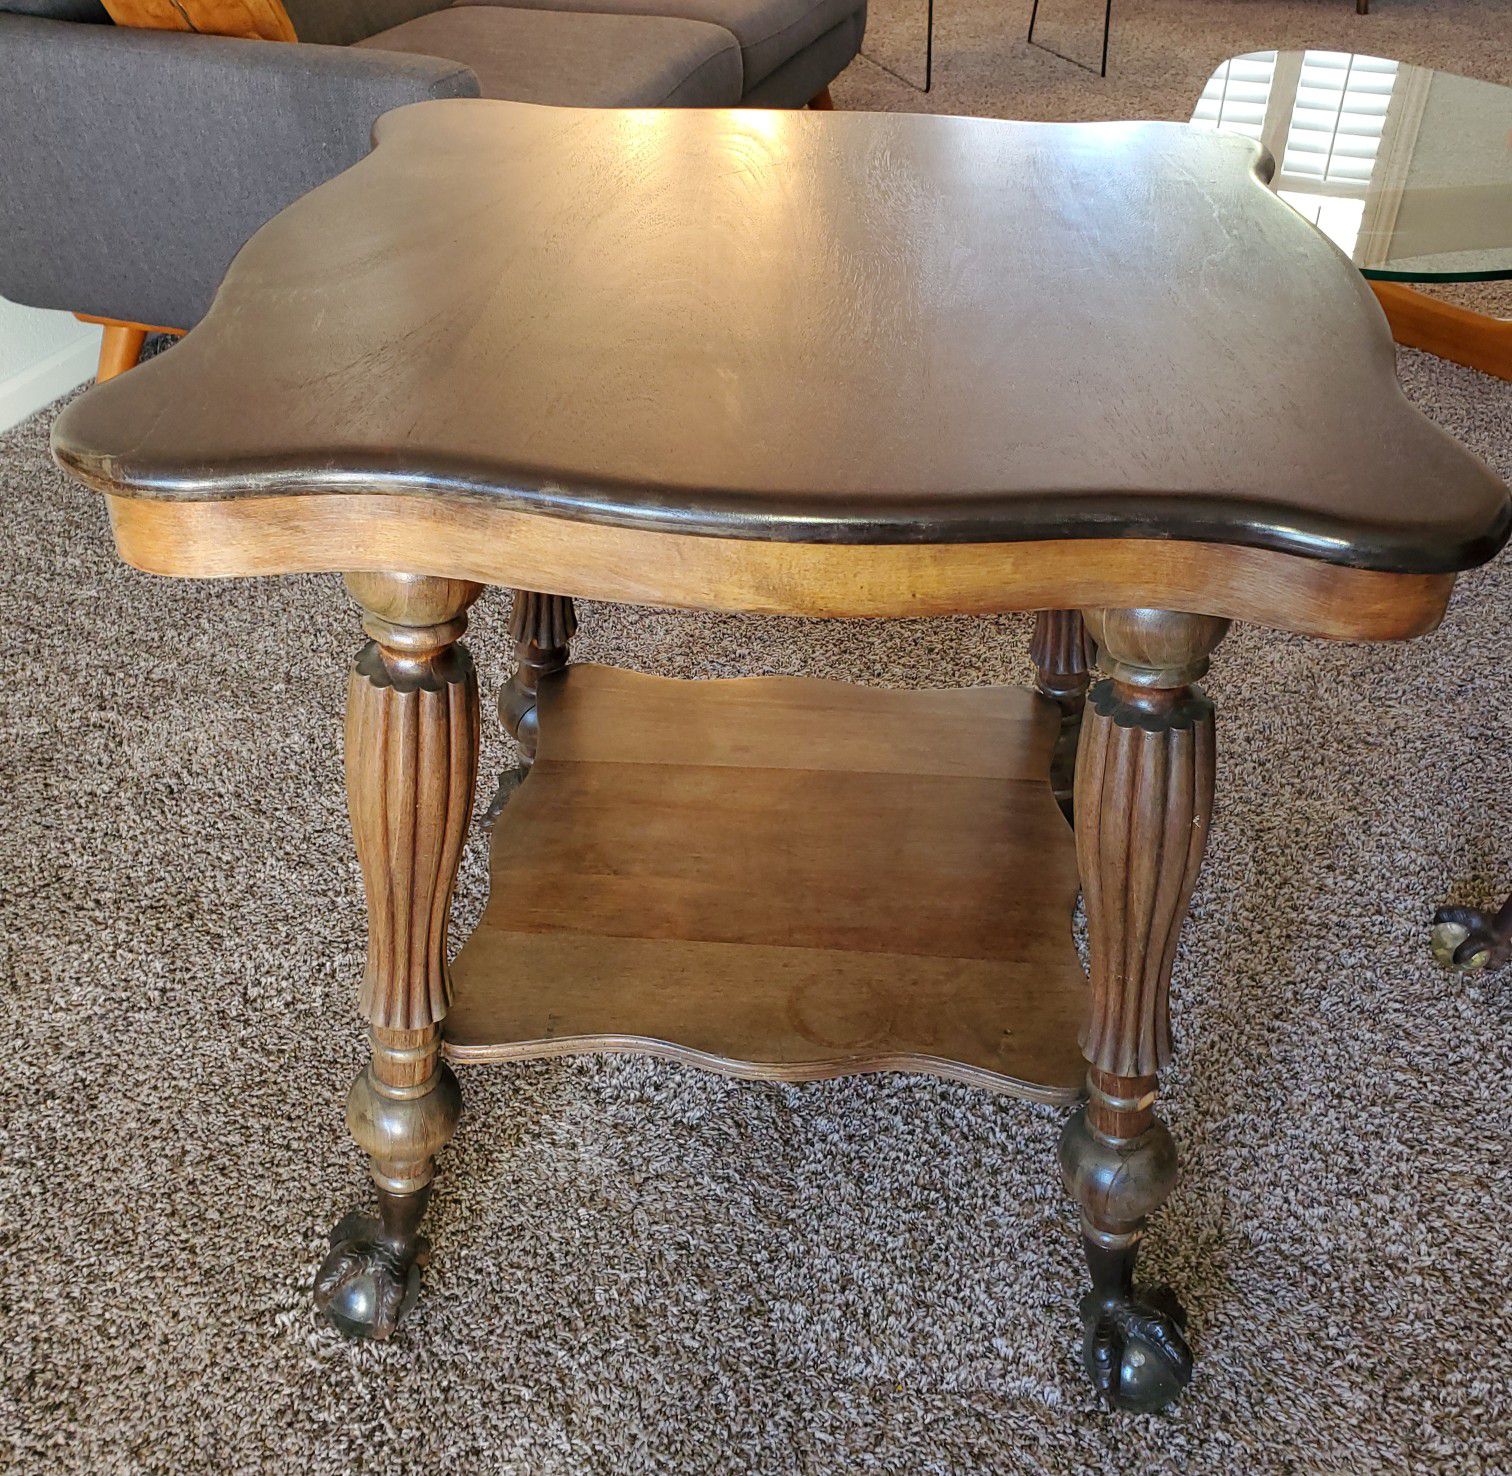 Antique tables with cast iron and glass ball feet